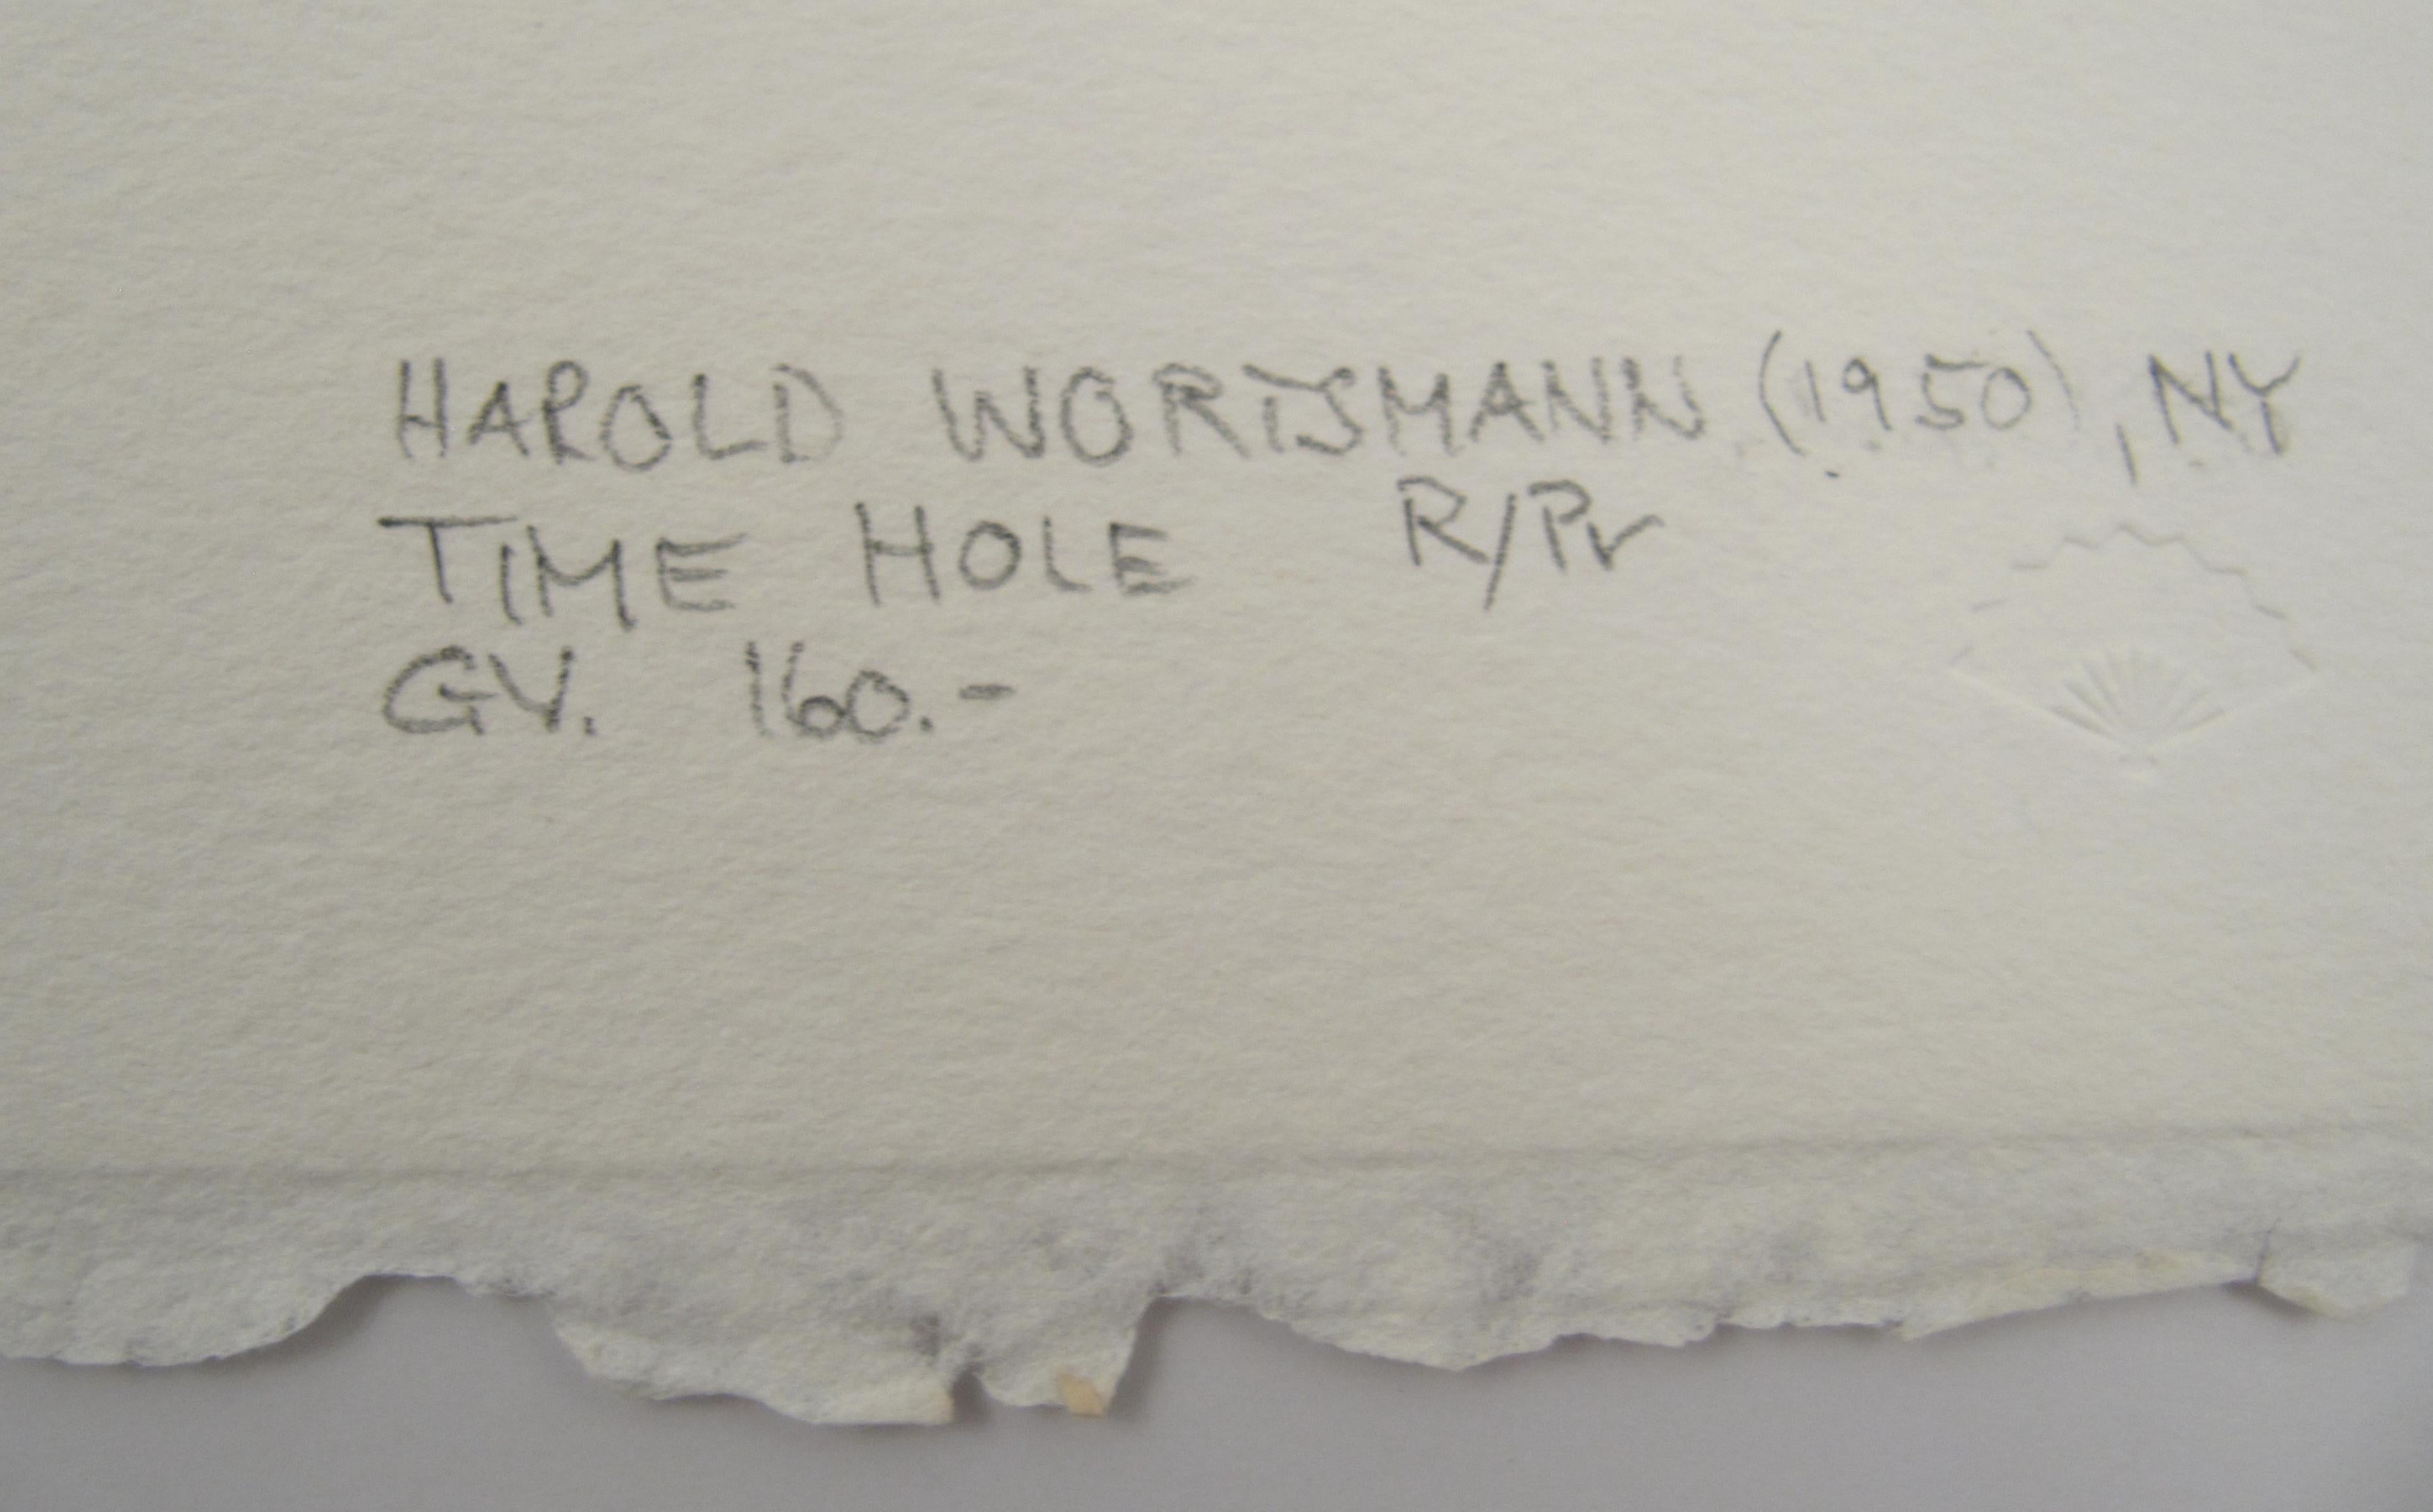 Harold Wortsmann (USA,  1950) - Limited Colored Engraving 16/20 - Time Hole For Sale 4